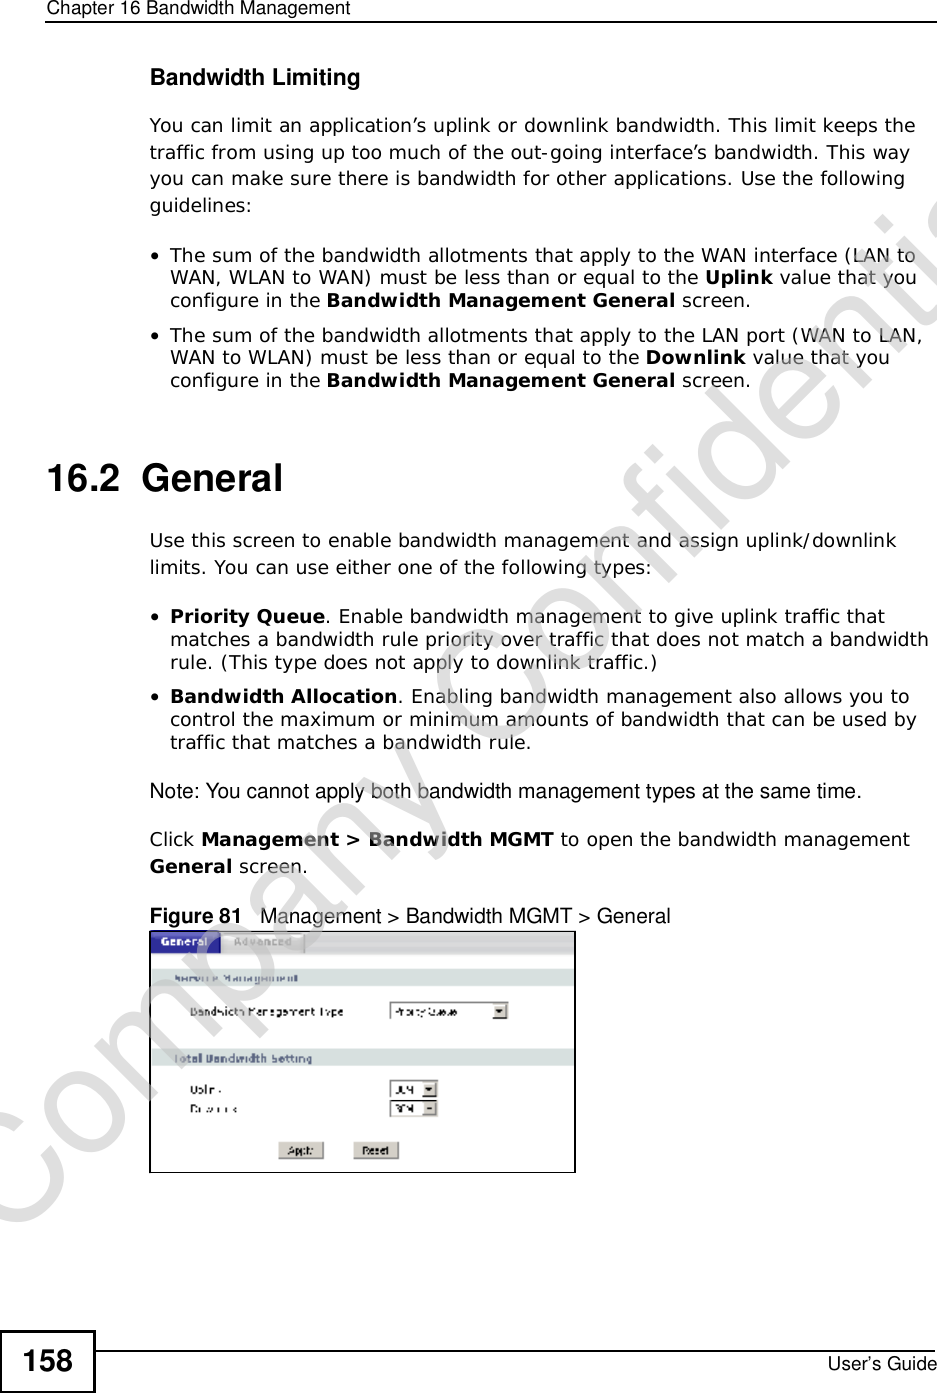 Chapter 16Bandwidth ManagementUser’s Guide158Bandwidth LimitingYou can limit an application’s uplink or downlink bandwidth. This limit keeps the traffic from using up too much of the out-going interface’s bandwidth. This way you can make sure there is bandwidth for other applications. Use the following guidelines:•The sum of the bandwidth allotments that apply to the WAN interface (LAN to WAN, WLAN to WAN) must be less than or equal to the Uplink value that you configure in the Bandwidth ManagementGeneral screen. •The sum of the bandwidth allotments that apply to the LAN port (WAN to LAN, WAN to WLAN) must be less than or equal to the Downlink value that you configure in the Bandwidth ManagementGeneral screen.16.2  General Use this screen to enable bandwidth management and assign uplink/downlink limits. You can use either one of the following types:•Priority Queue. Enable bandwidth management to give uplink traffic that matches a bandwidth rule priority over traffic that does not match a bandwidth rule. (This type does not apply to downlink traffic.)  •Bandwidth Allocation. Enabling bandwidth management also allows you to control the maximum or minimum amounts of bandwidth that can be used by traffic that matches a bandwidth rule.Note: You cannot apply both bandwidth management types at the same time.Click Management&gt; Bandwidth MGMT to open the bandwidth management General screen.Figure 81   Management &gt; Bandwidth MGMT &gt; GeneralCompany Confidential